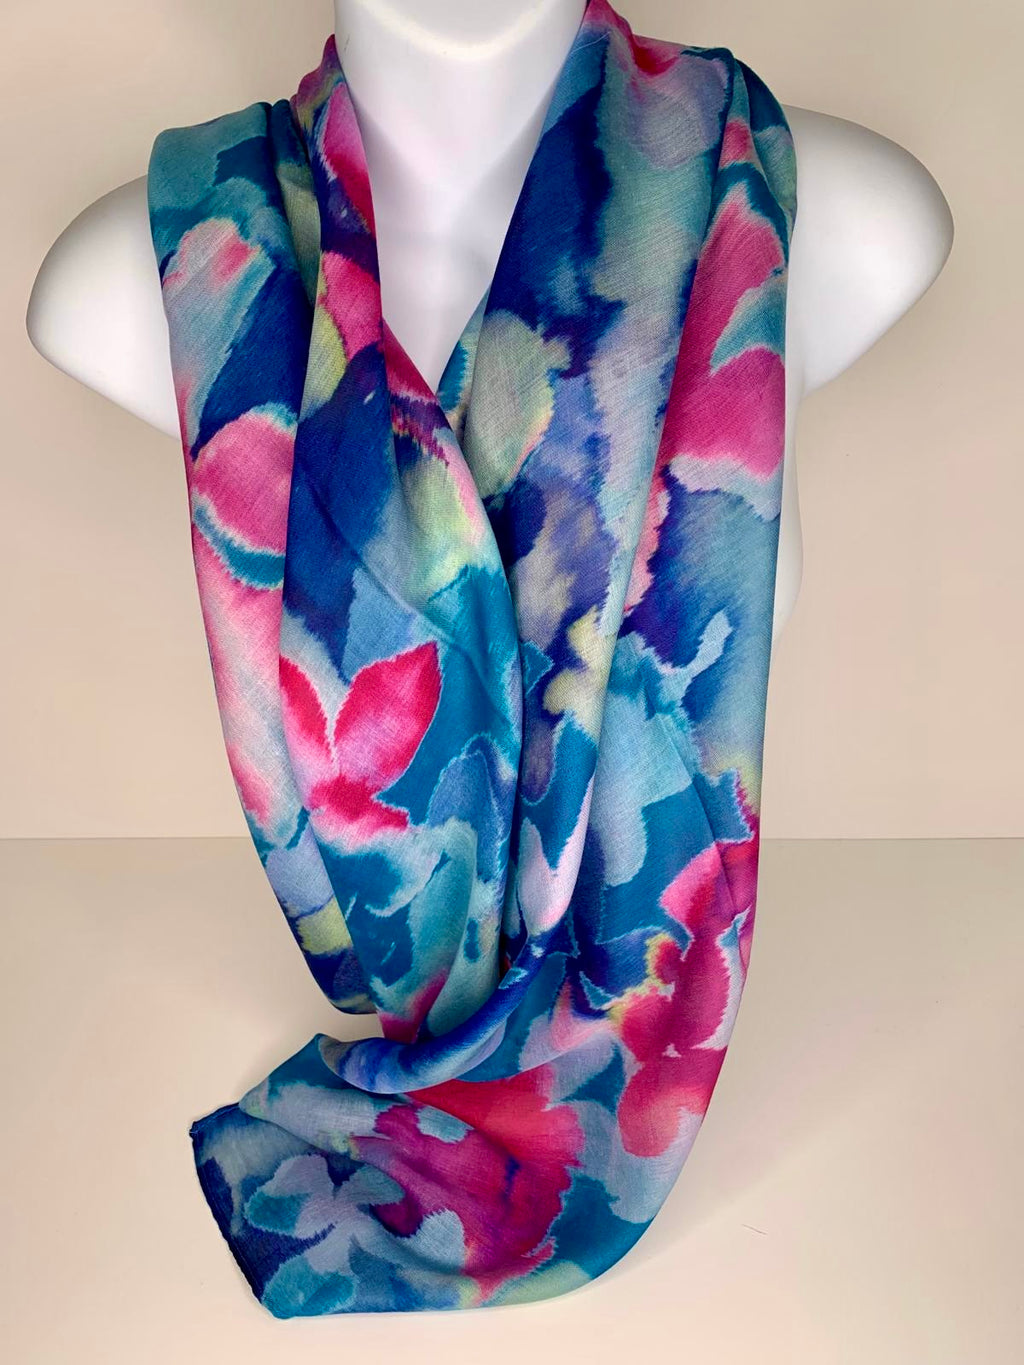 Floral design print scarf in shades of blue, pink and green